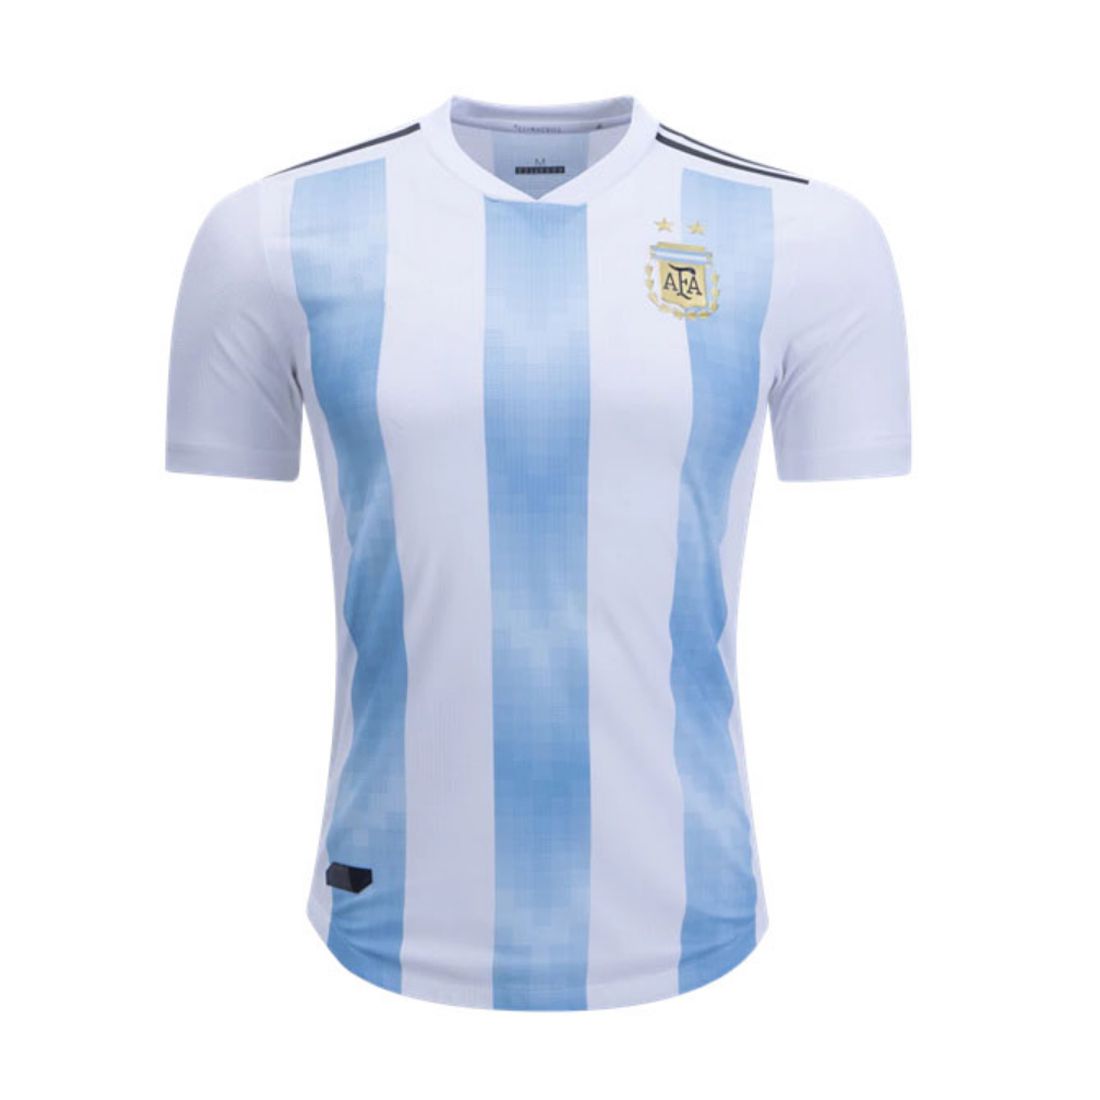 FIFA World Cup Argentina National Team Jersey - Buy FIFA World Cup